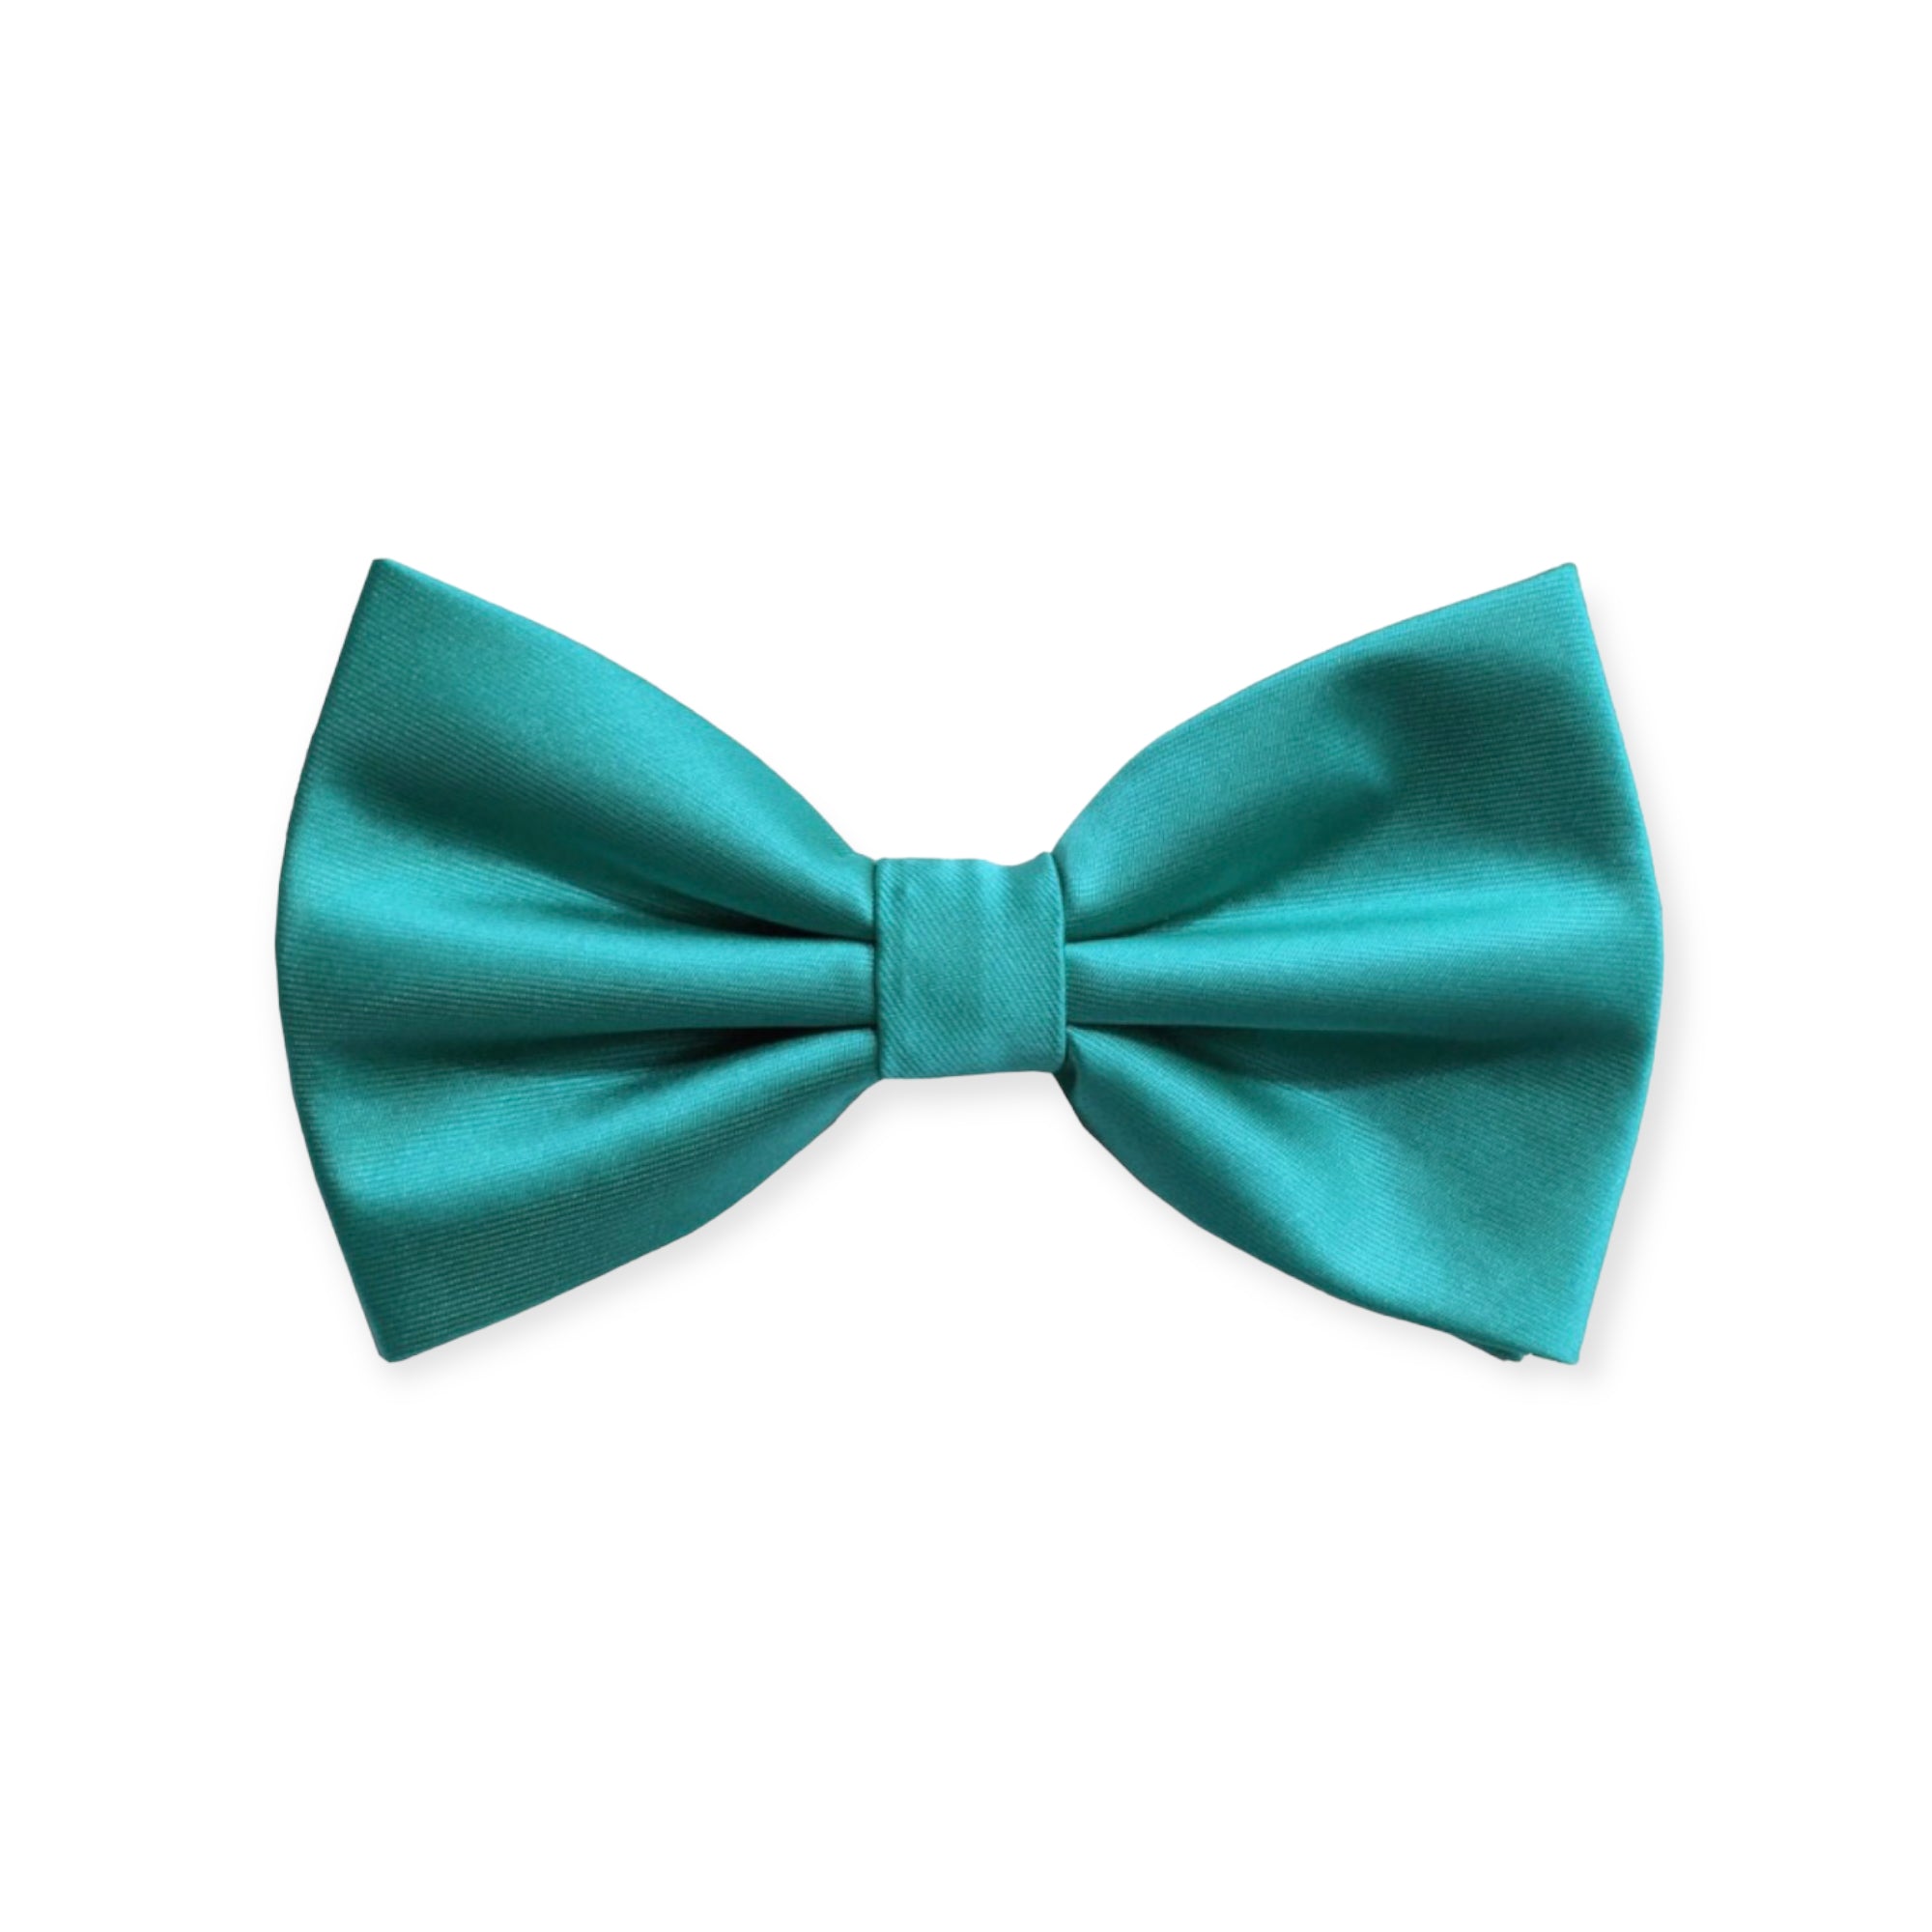 Solid Turquoise Bow Tie and Hanky